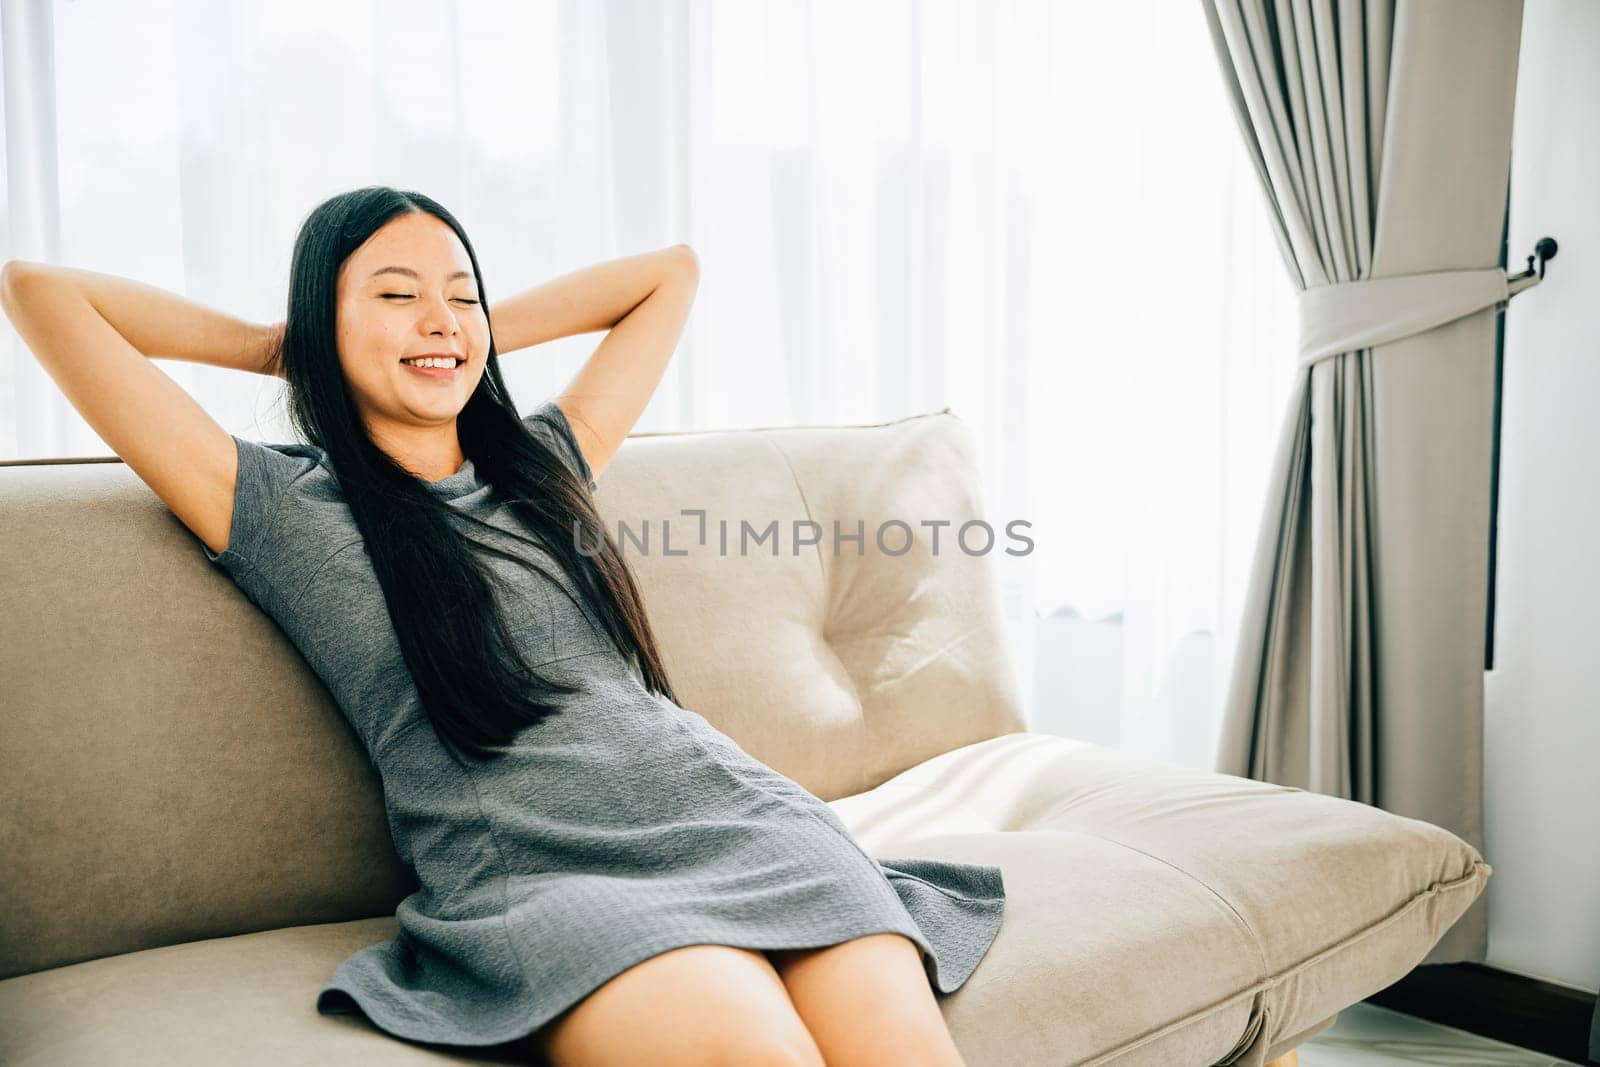 Relaxed woman on sofa hands behind head enjoys serene moment. Dreaming and finding balance in a cozy modern living room. Embracing relaxation wellbeing and mindfulness. Kick back and relax concept